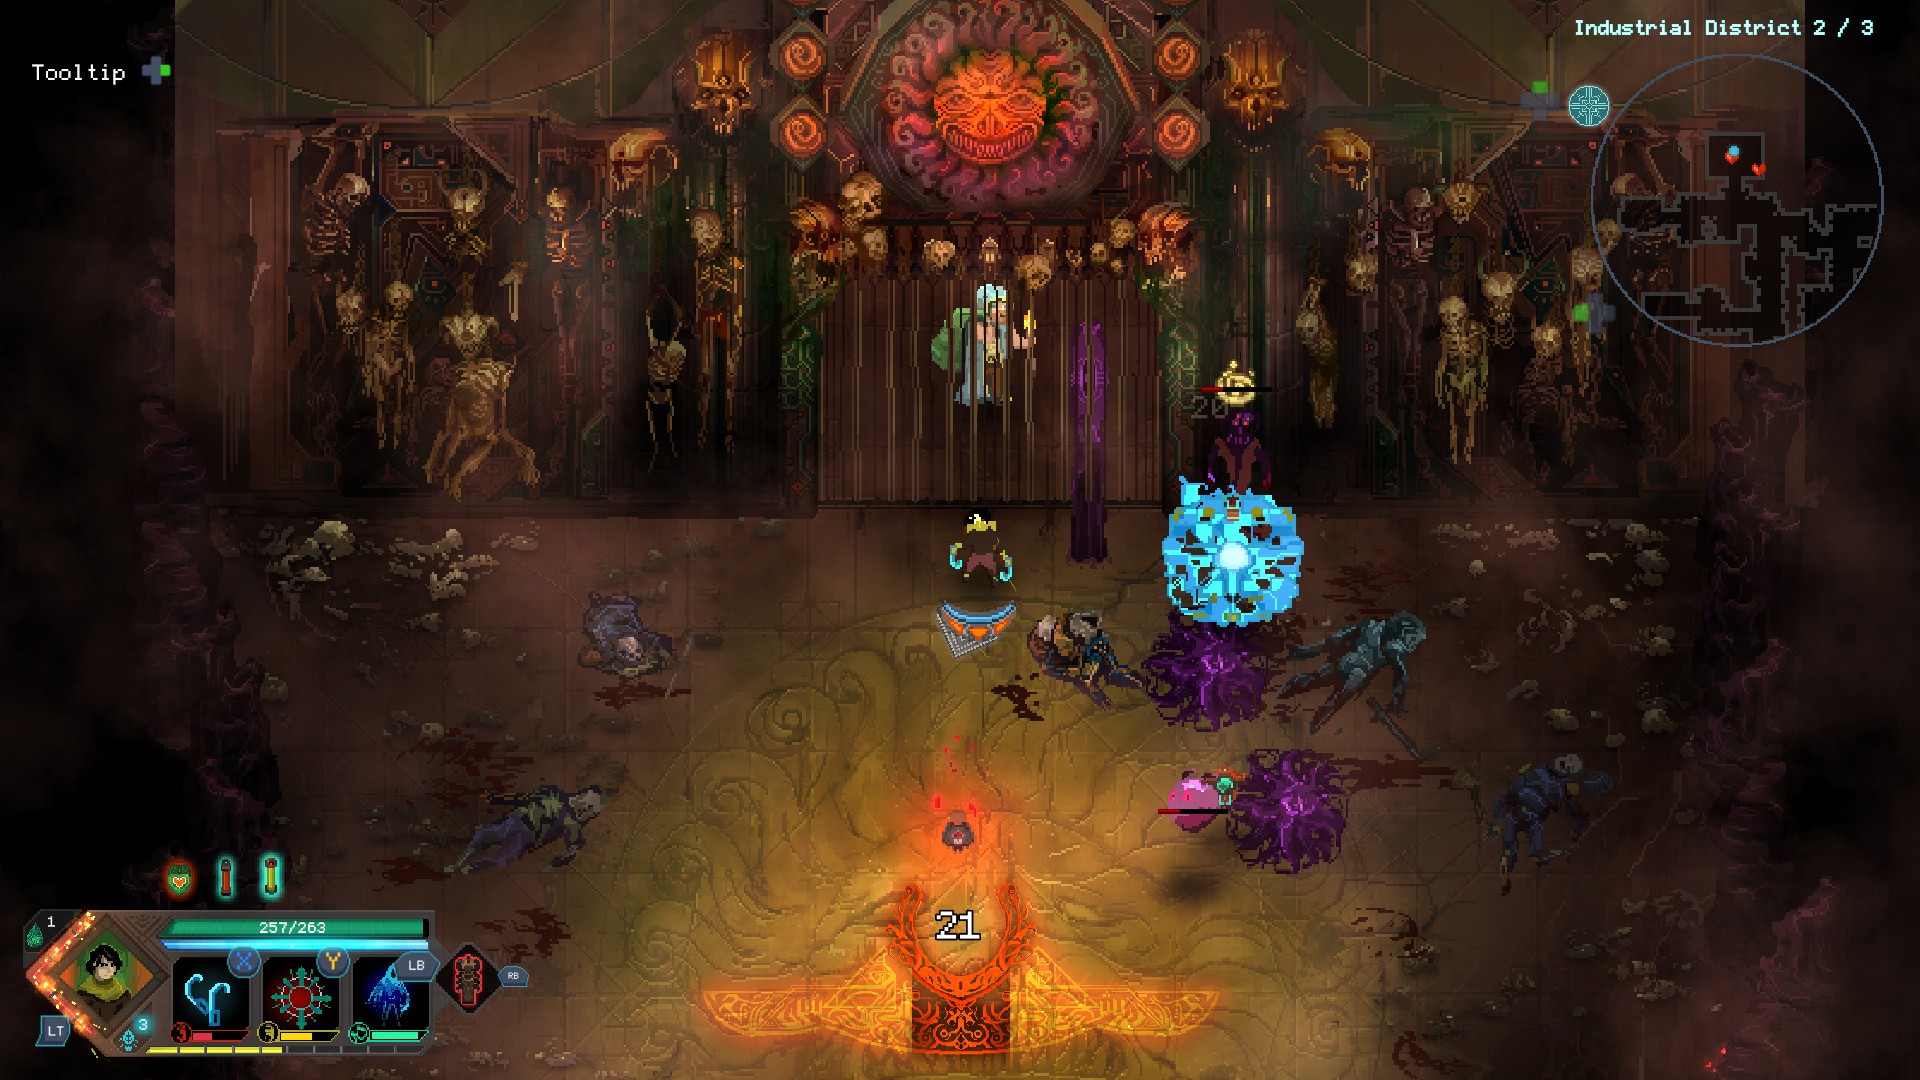 Children of Morta – IT RUNS IN THE FAMILY – Children of Morta is a story-driven hack&#39;n&#39;slash game with roguelite elements where you help family of Bergsons defend Mount Morta against the